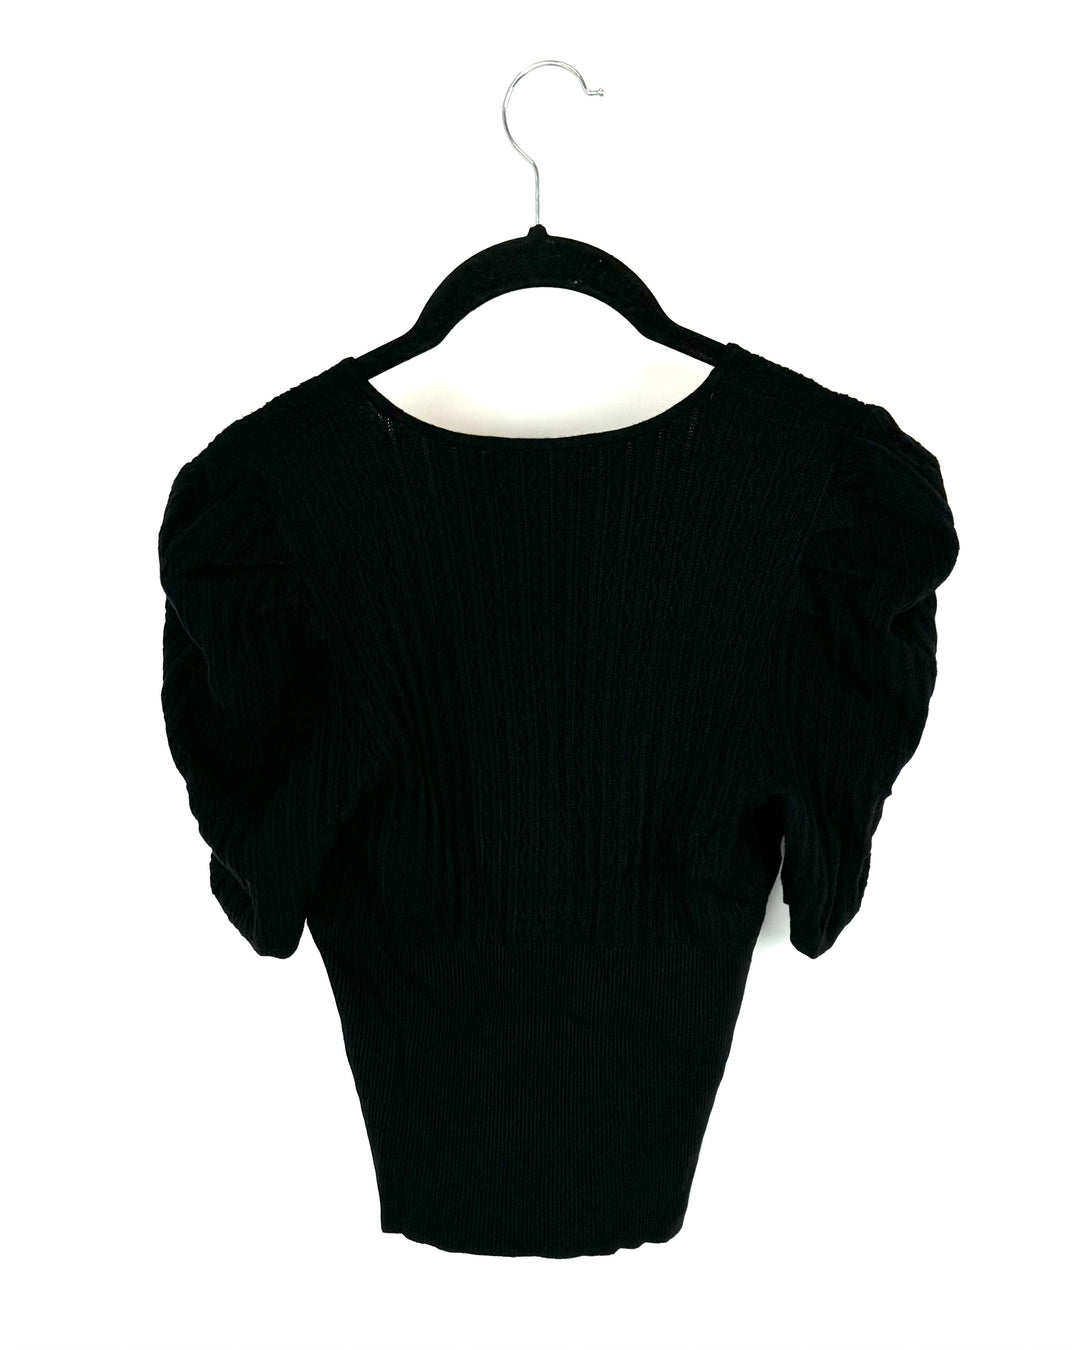 Black Fitted Sweater - Size 4/6